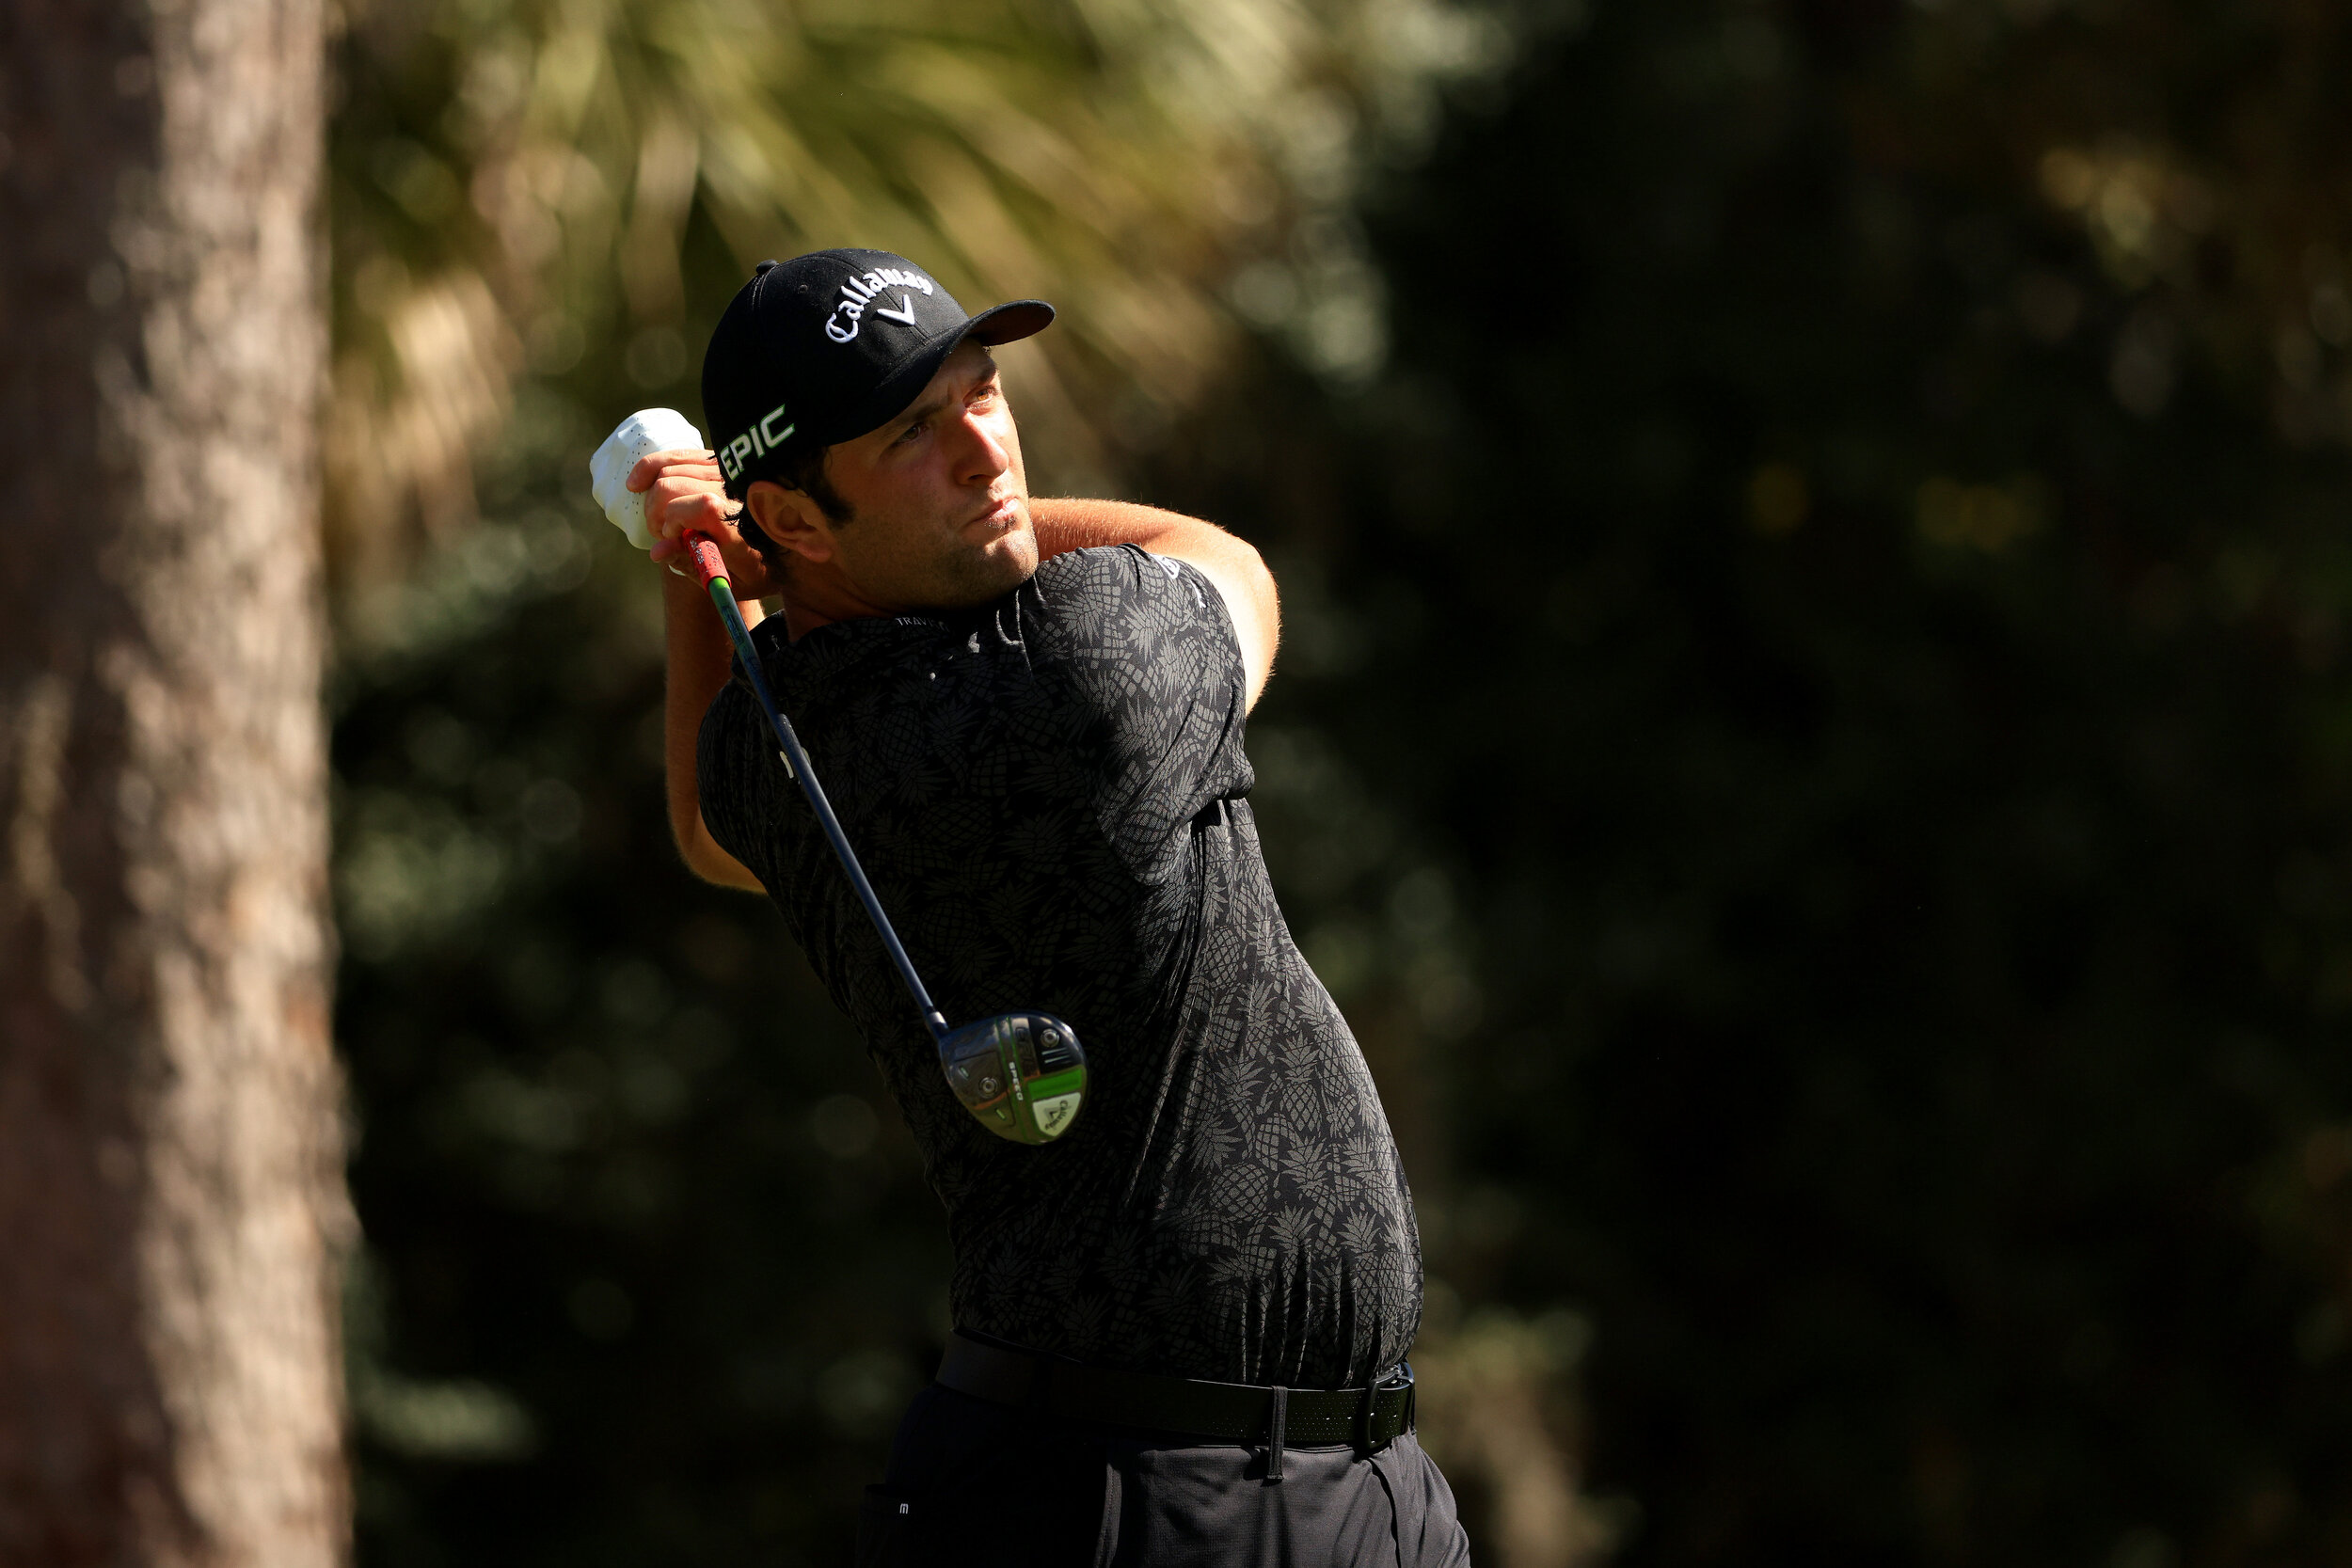  PONTE VEDRA BEACH, FLORIDA - MARCH 12: Jon Rahm of Spain plays his shot from the second tee during the second round of THE PLAYERS Championship on THE PLAYERS Stadium Course at TPC Sawgrass on March 12, 2021 in Ponte Vedra Beach, Florida. (Photo by 